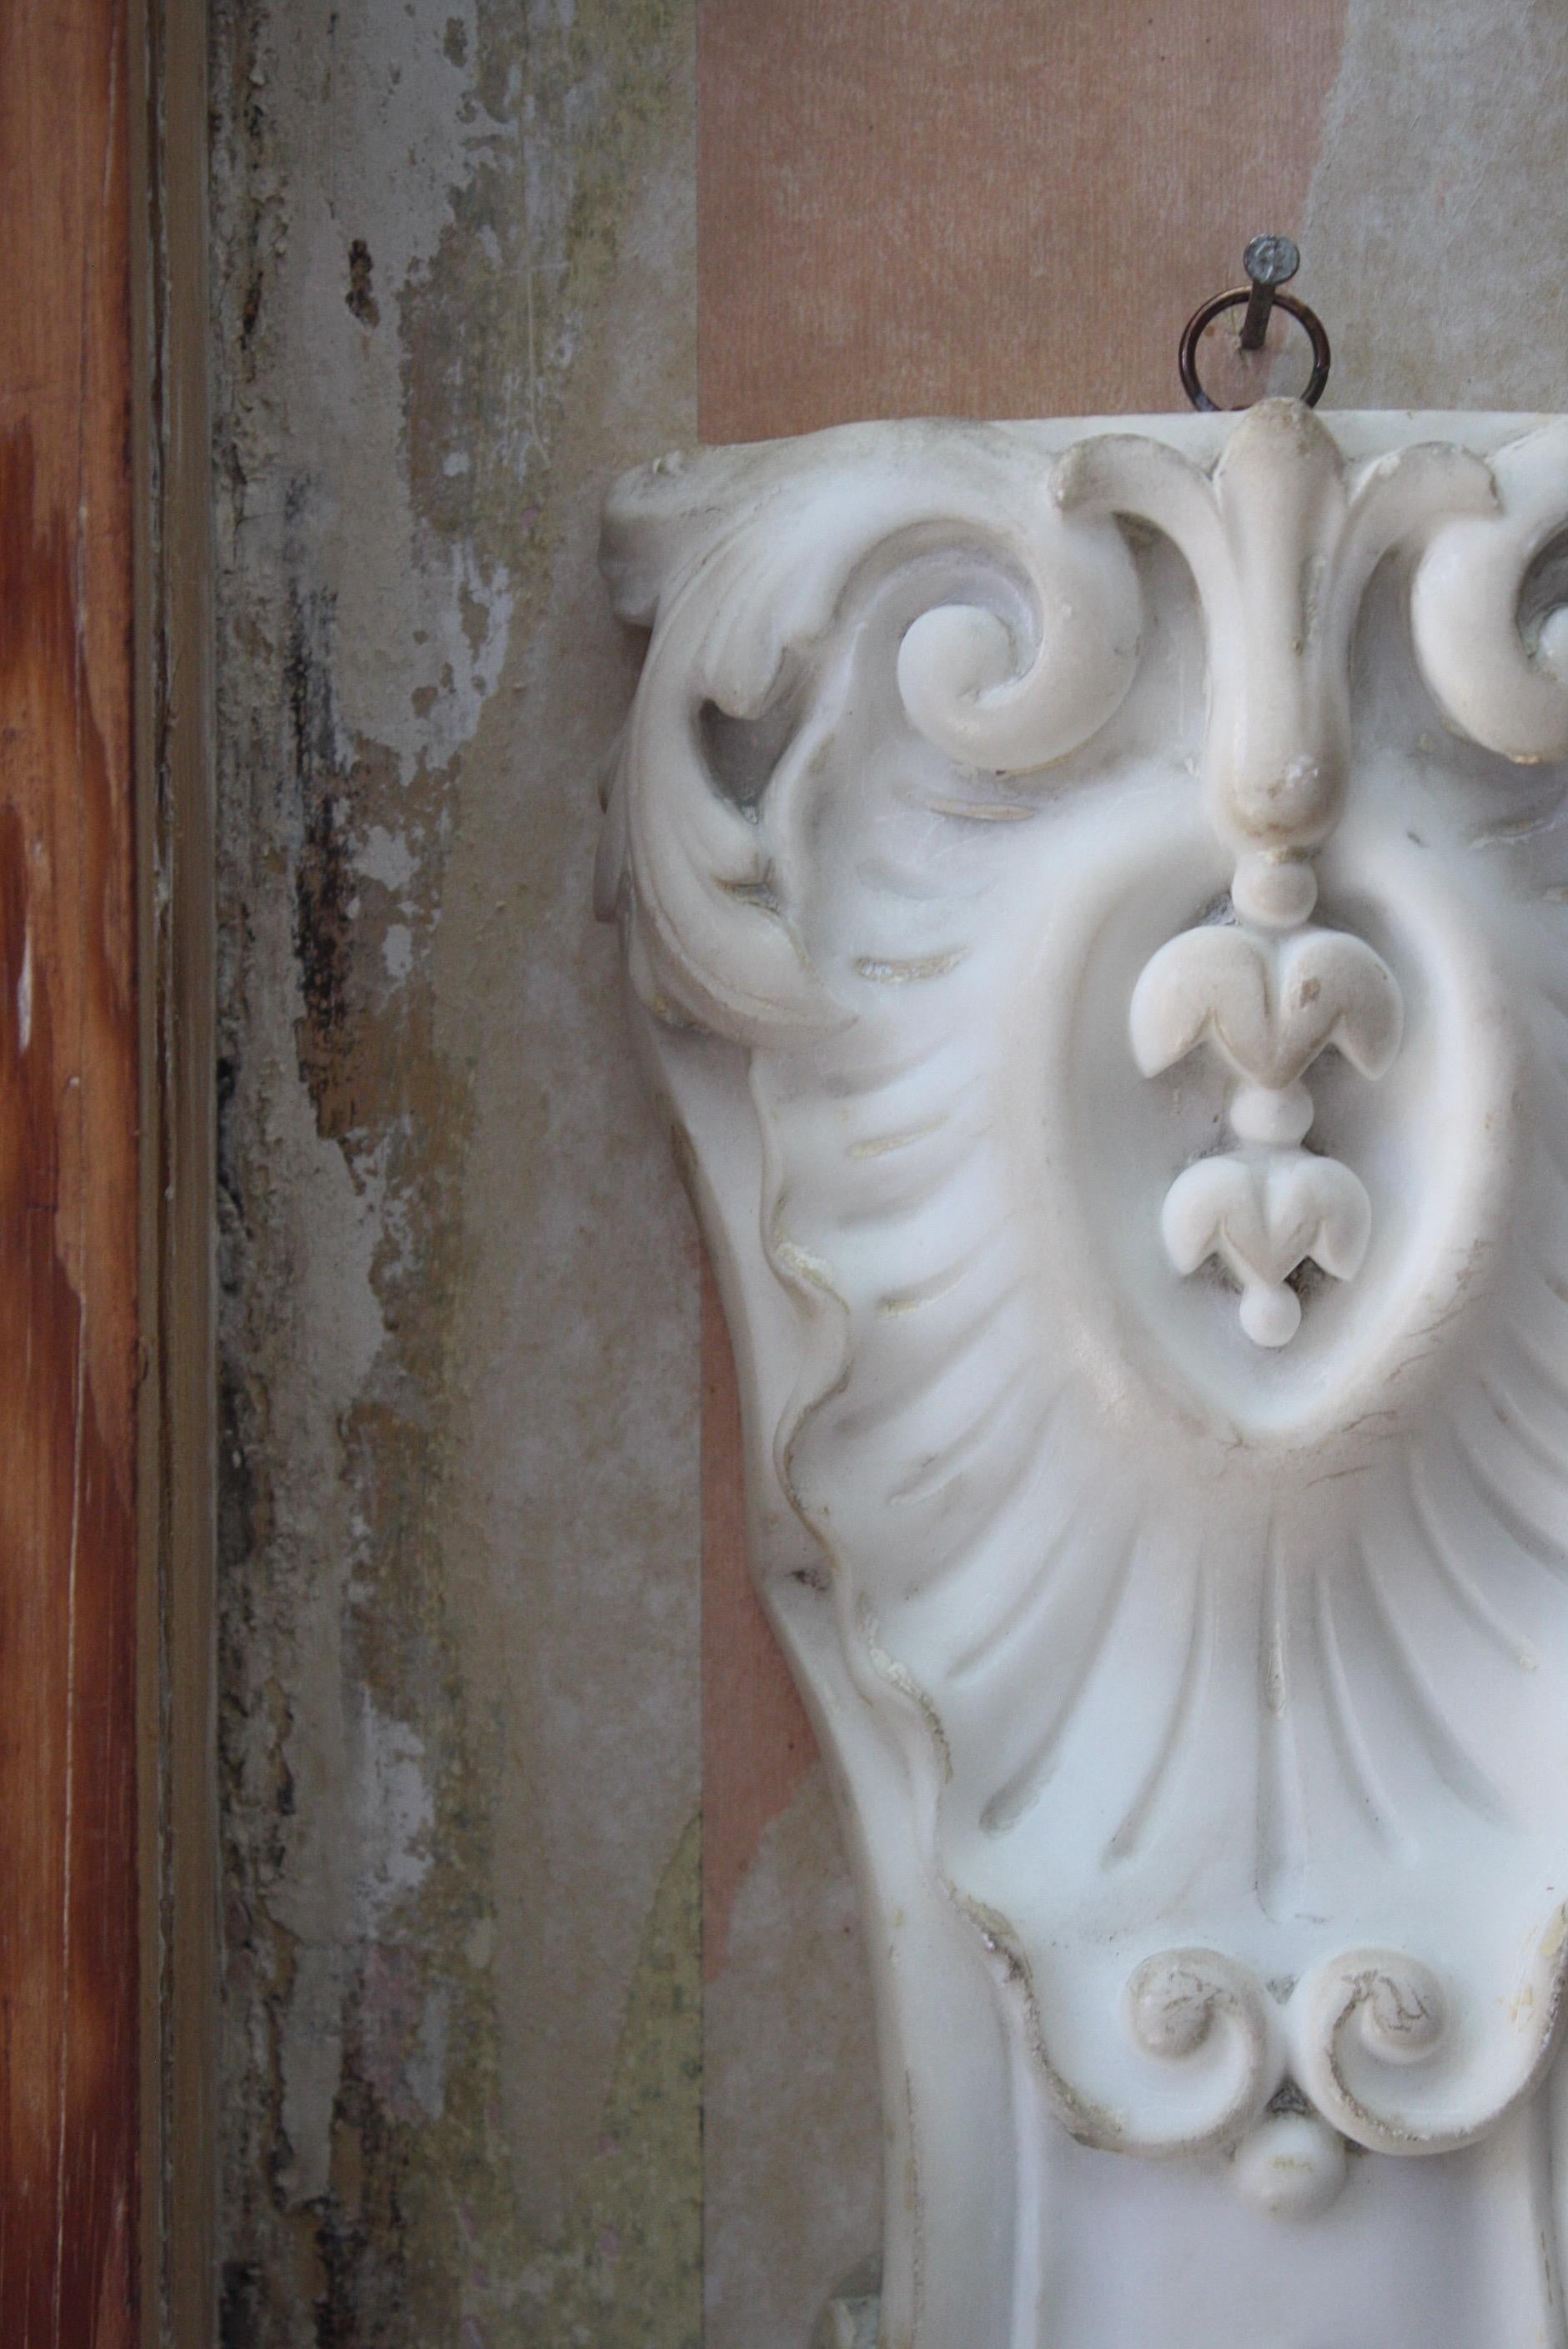 Pair of 19th century carved marble decorative tablets with organic following line s very much in the rococo revival style, previously part of larger interior architectural feature

The sections are extremely well carved, crisp and have a good